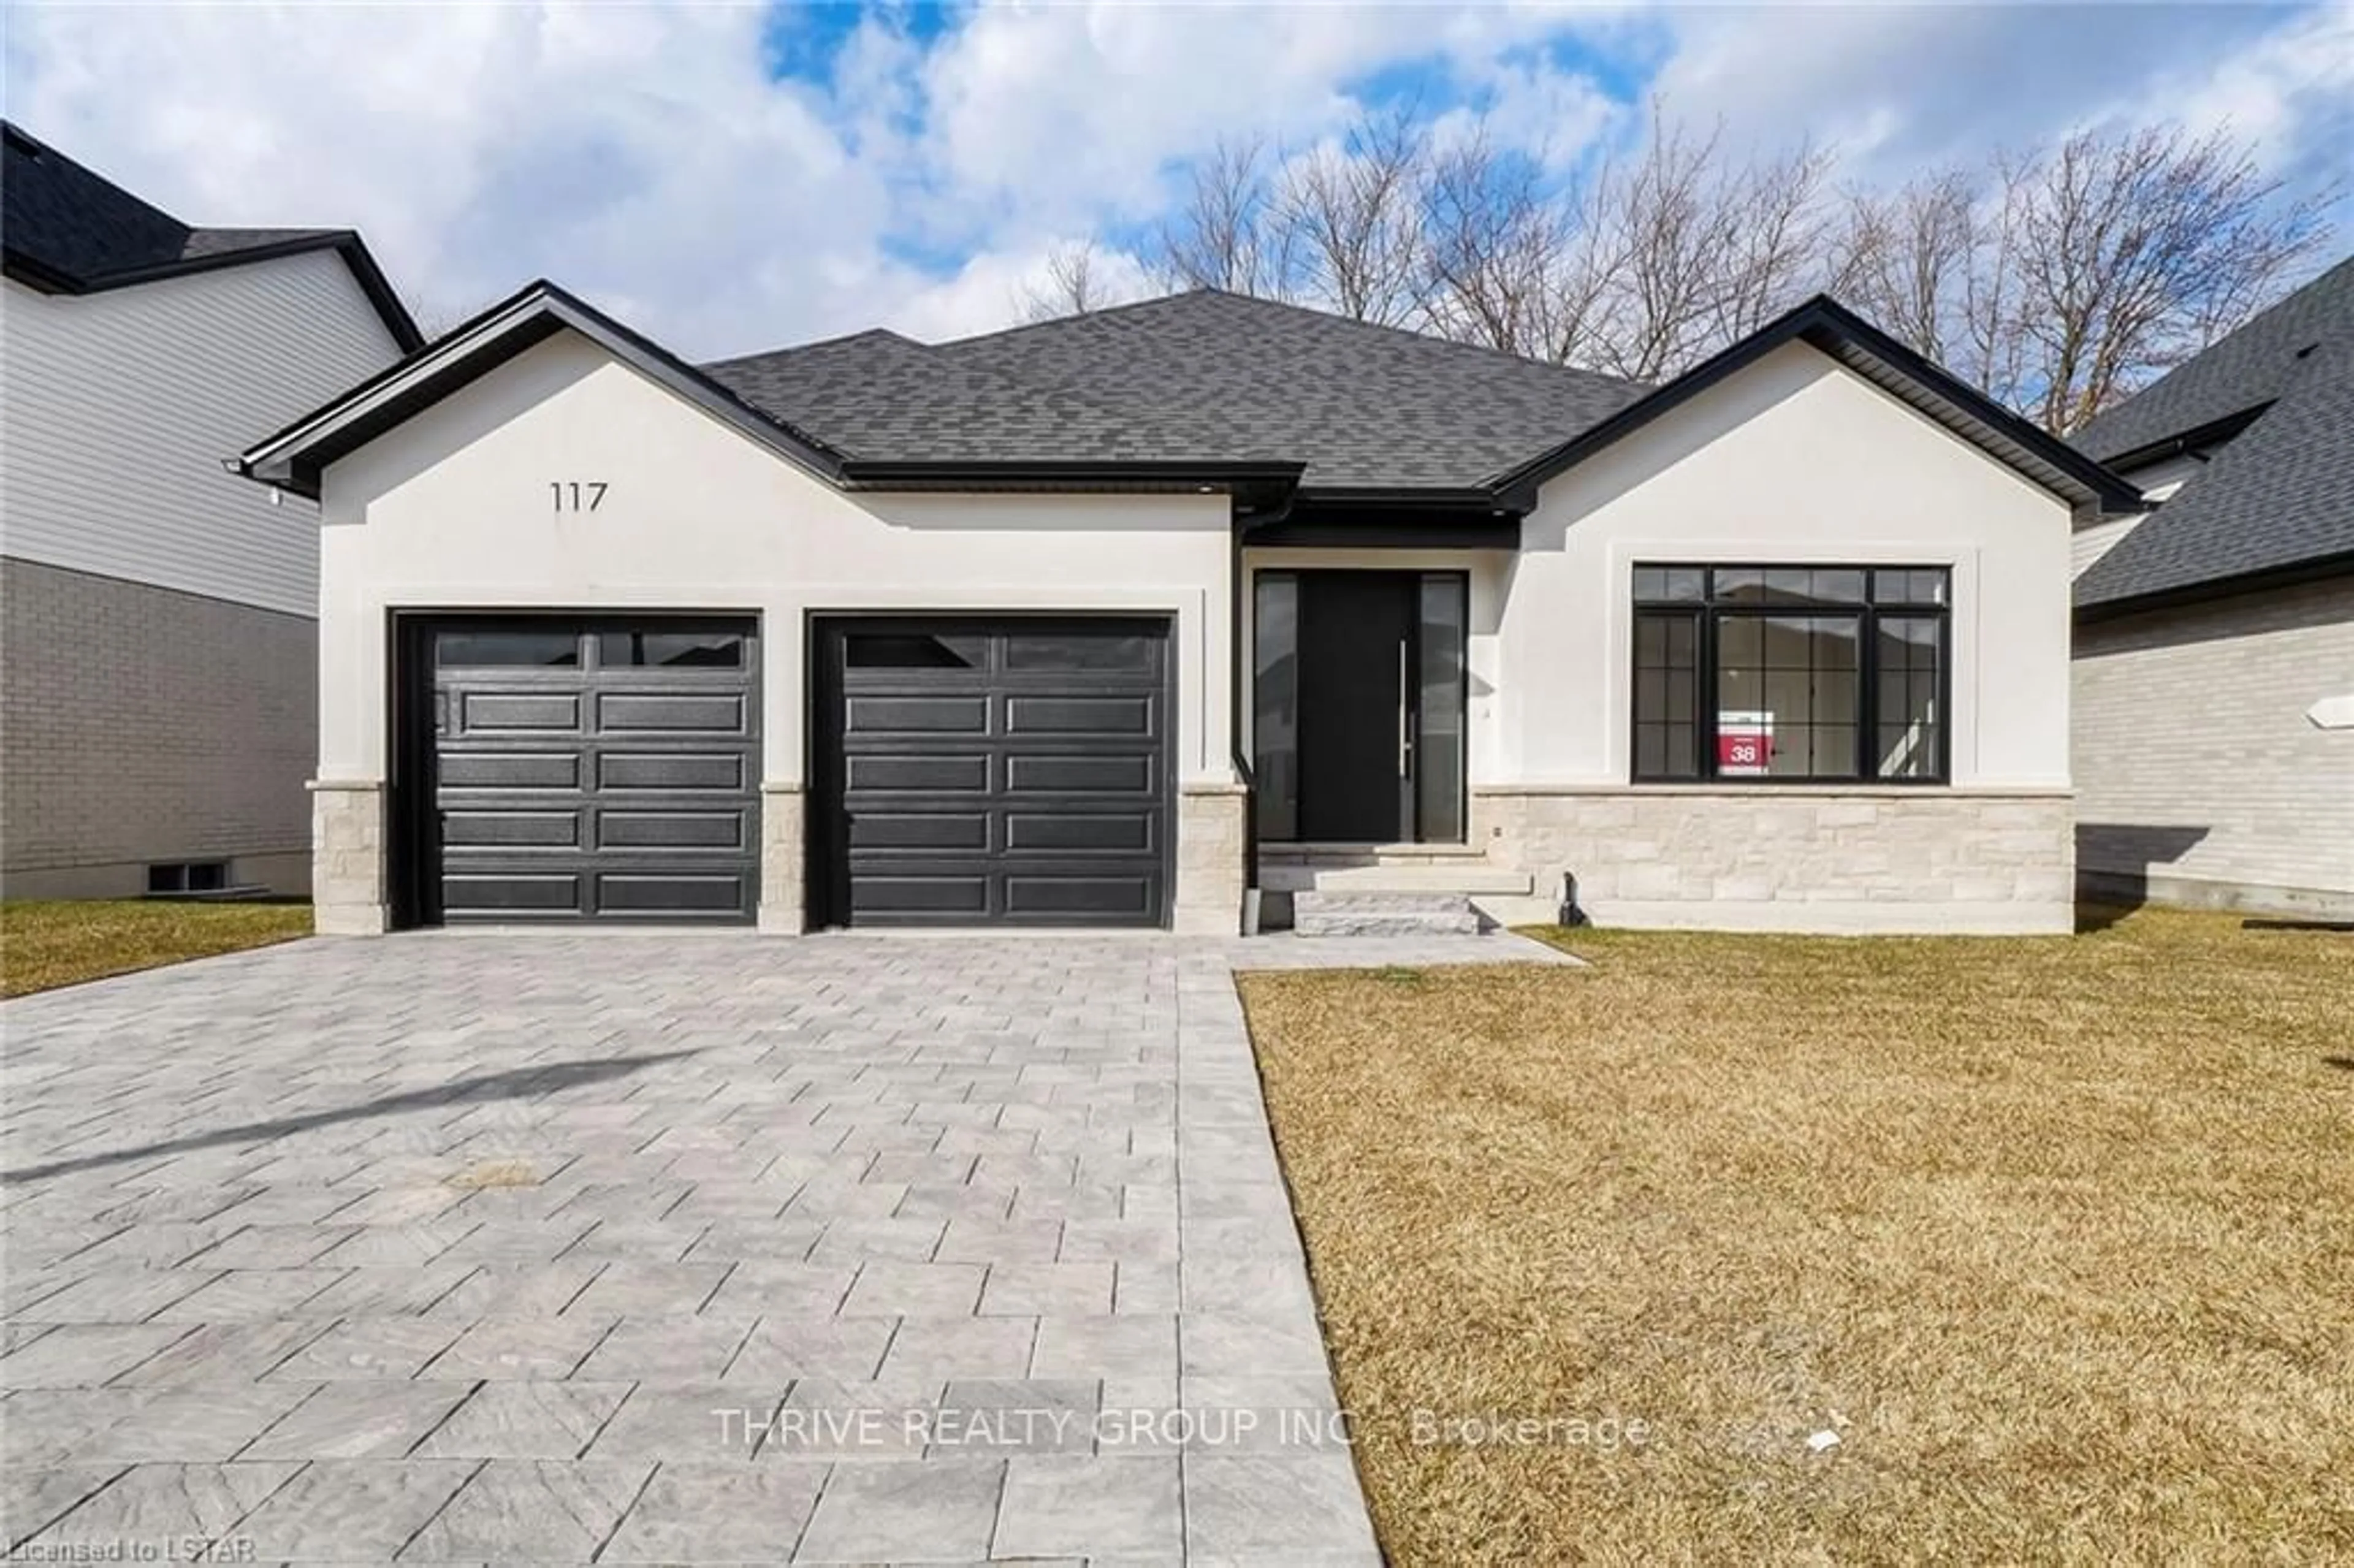 Home with brick exterior material for 117 Aspen Circ, Thames Centre Ontario N0M 0A4